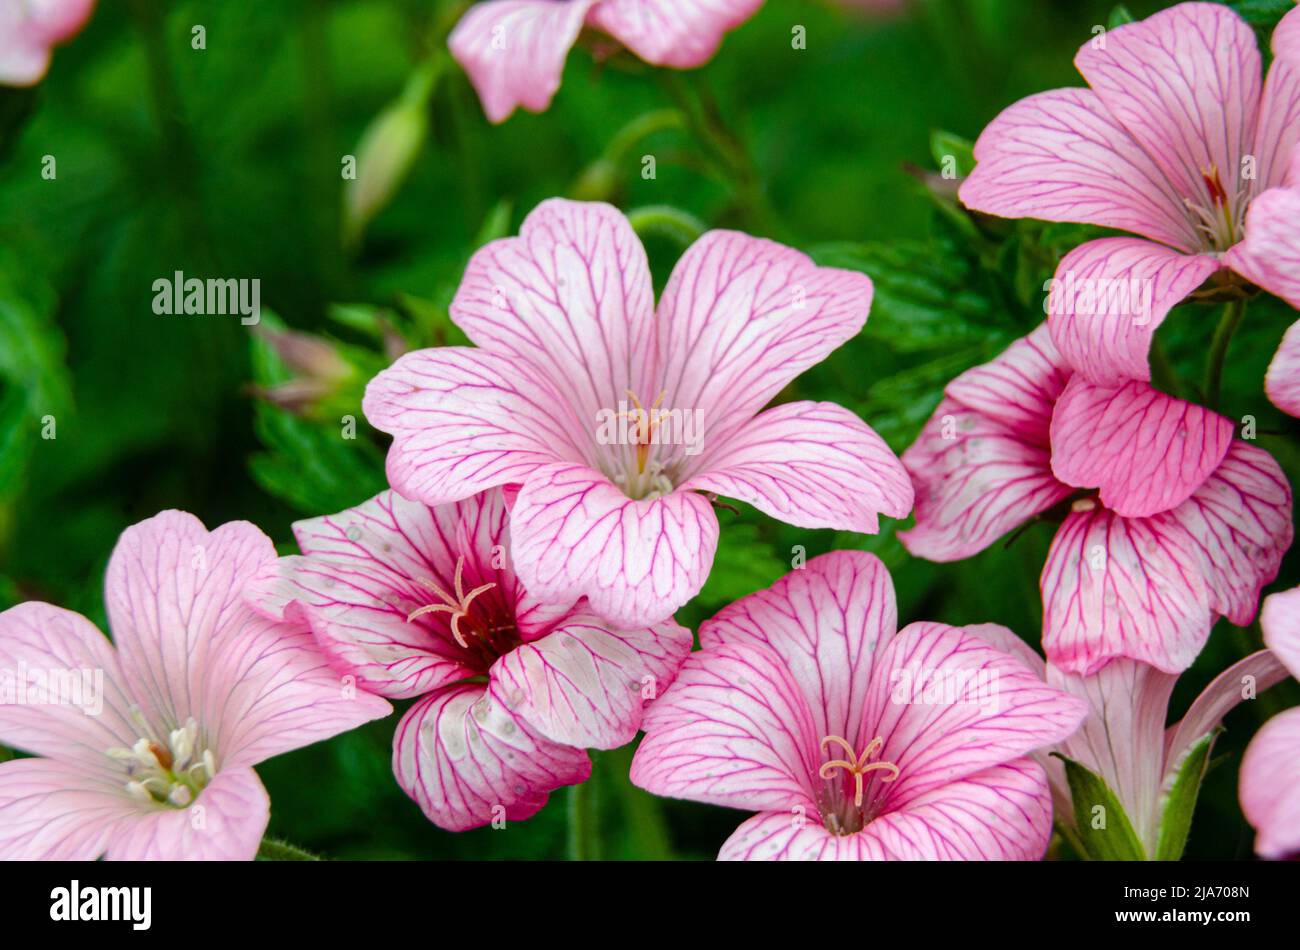 Geranium endressii or French cranesbill flowering on a garden Stock Photo